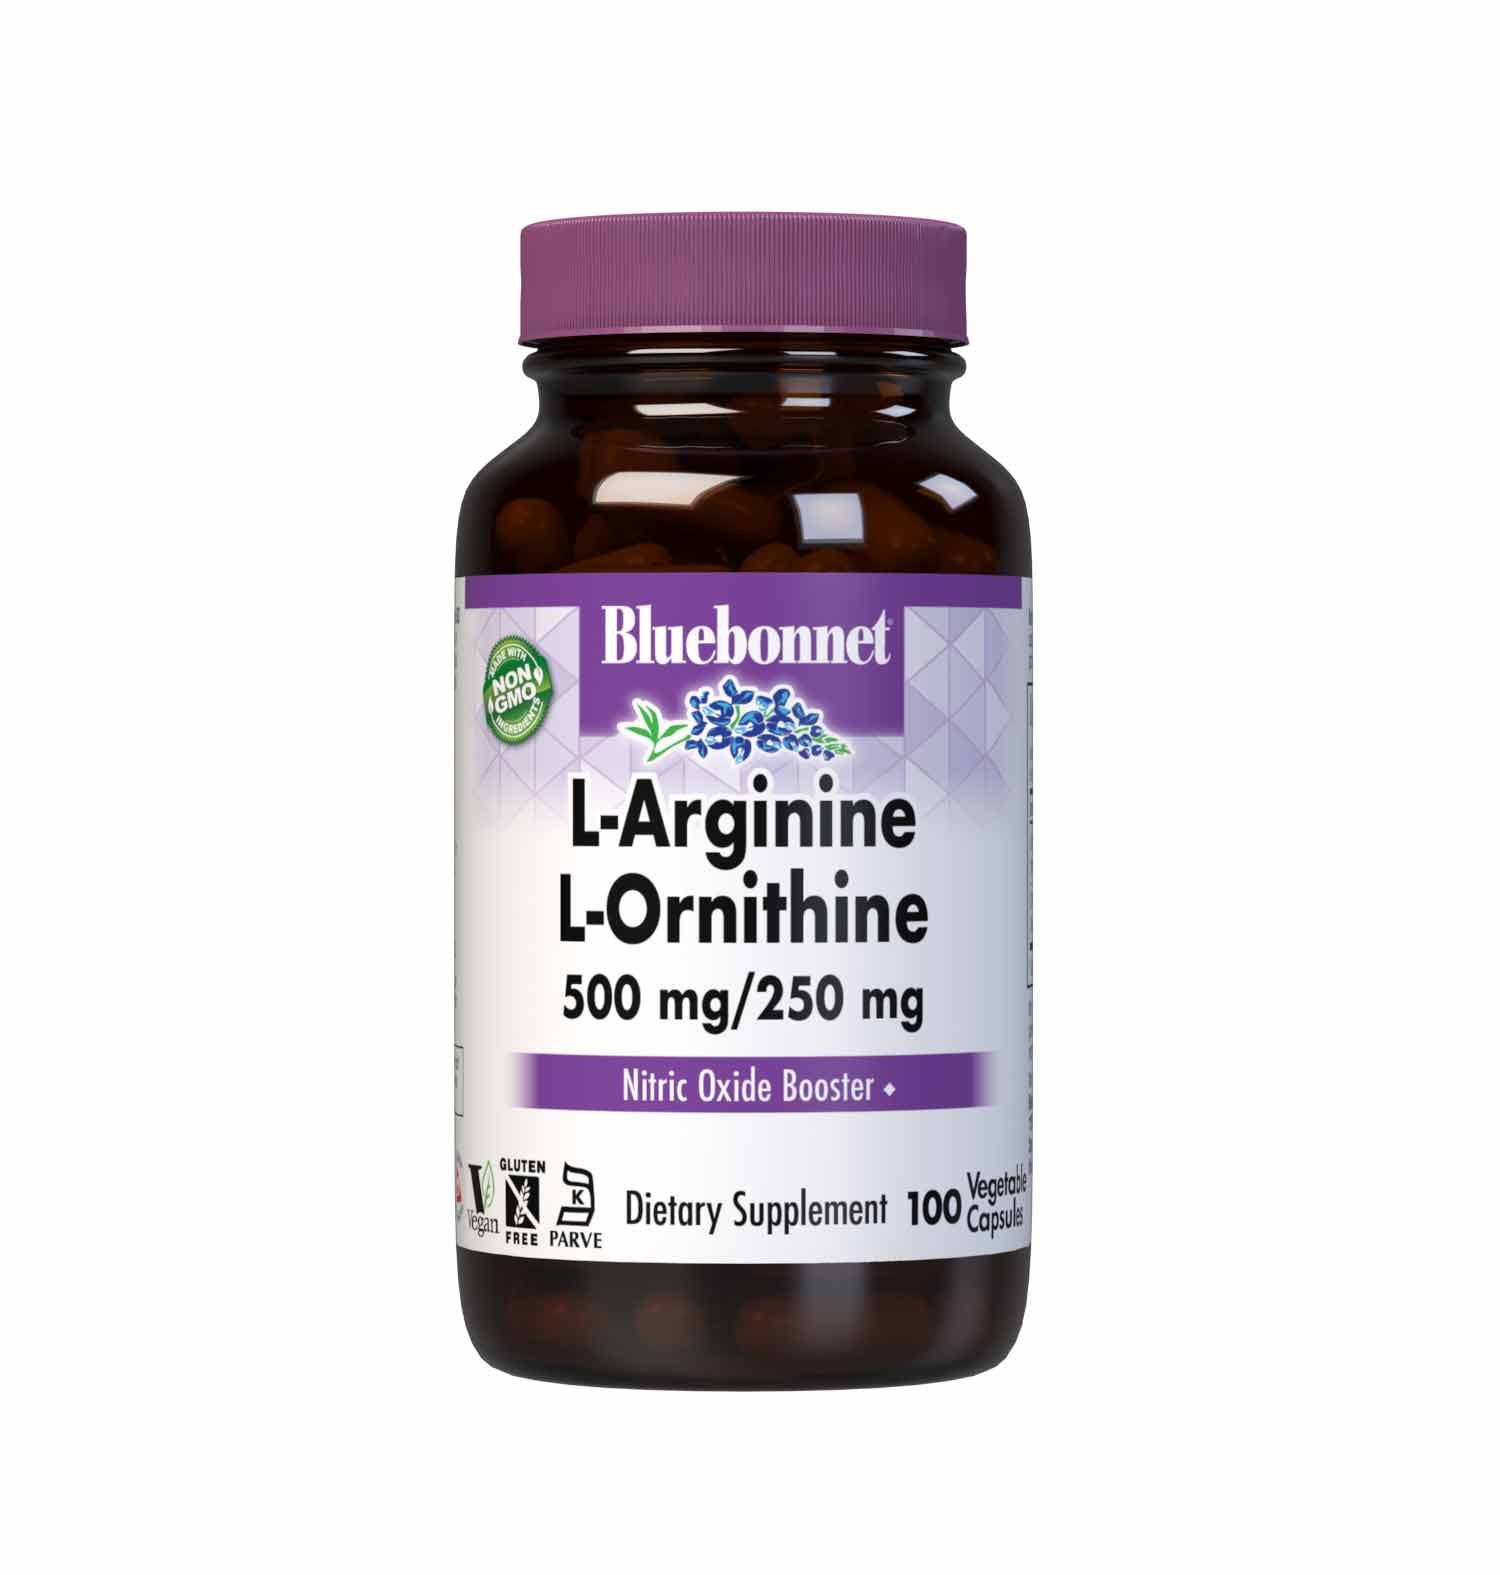 Bluebonnet’s L-Arginine 500 mg/L-Ornithine 250 mg 100 Vegetable Capsules provide the pharmaceutical grade, free-form amino acids L-arginine and L-ornithine HCI in their crystalline form from Ajinomoto. #size_100 count